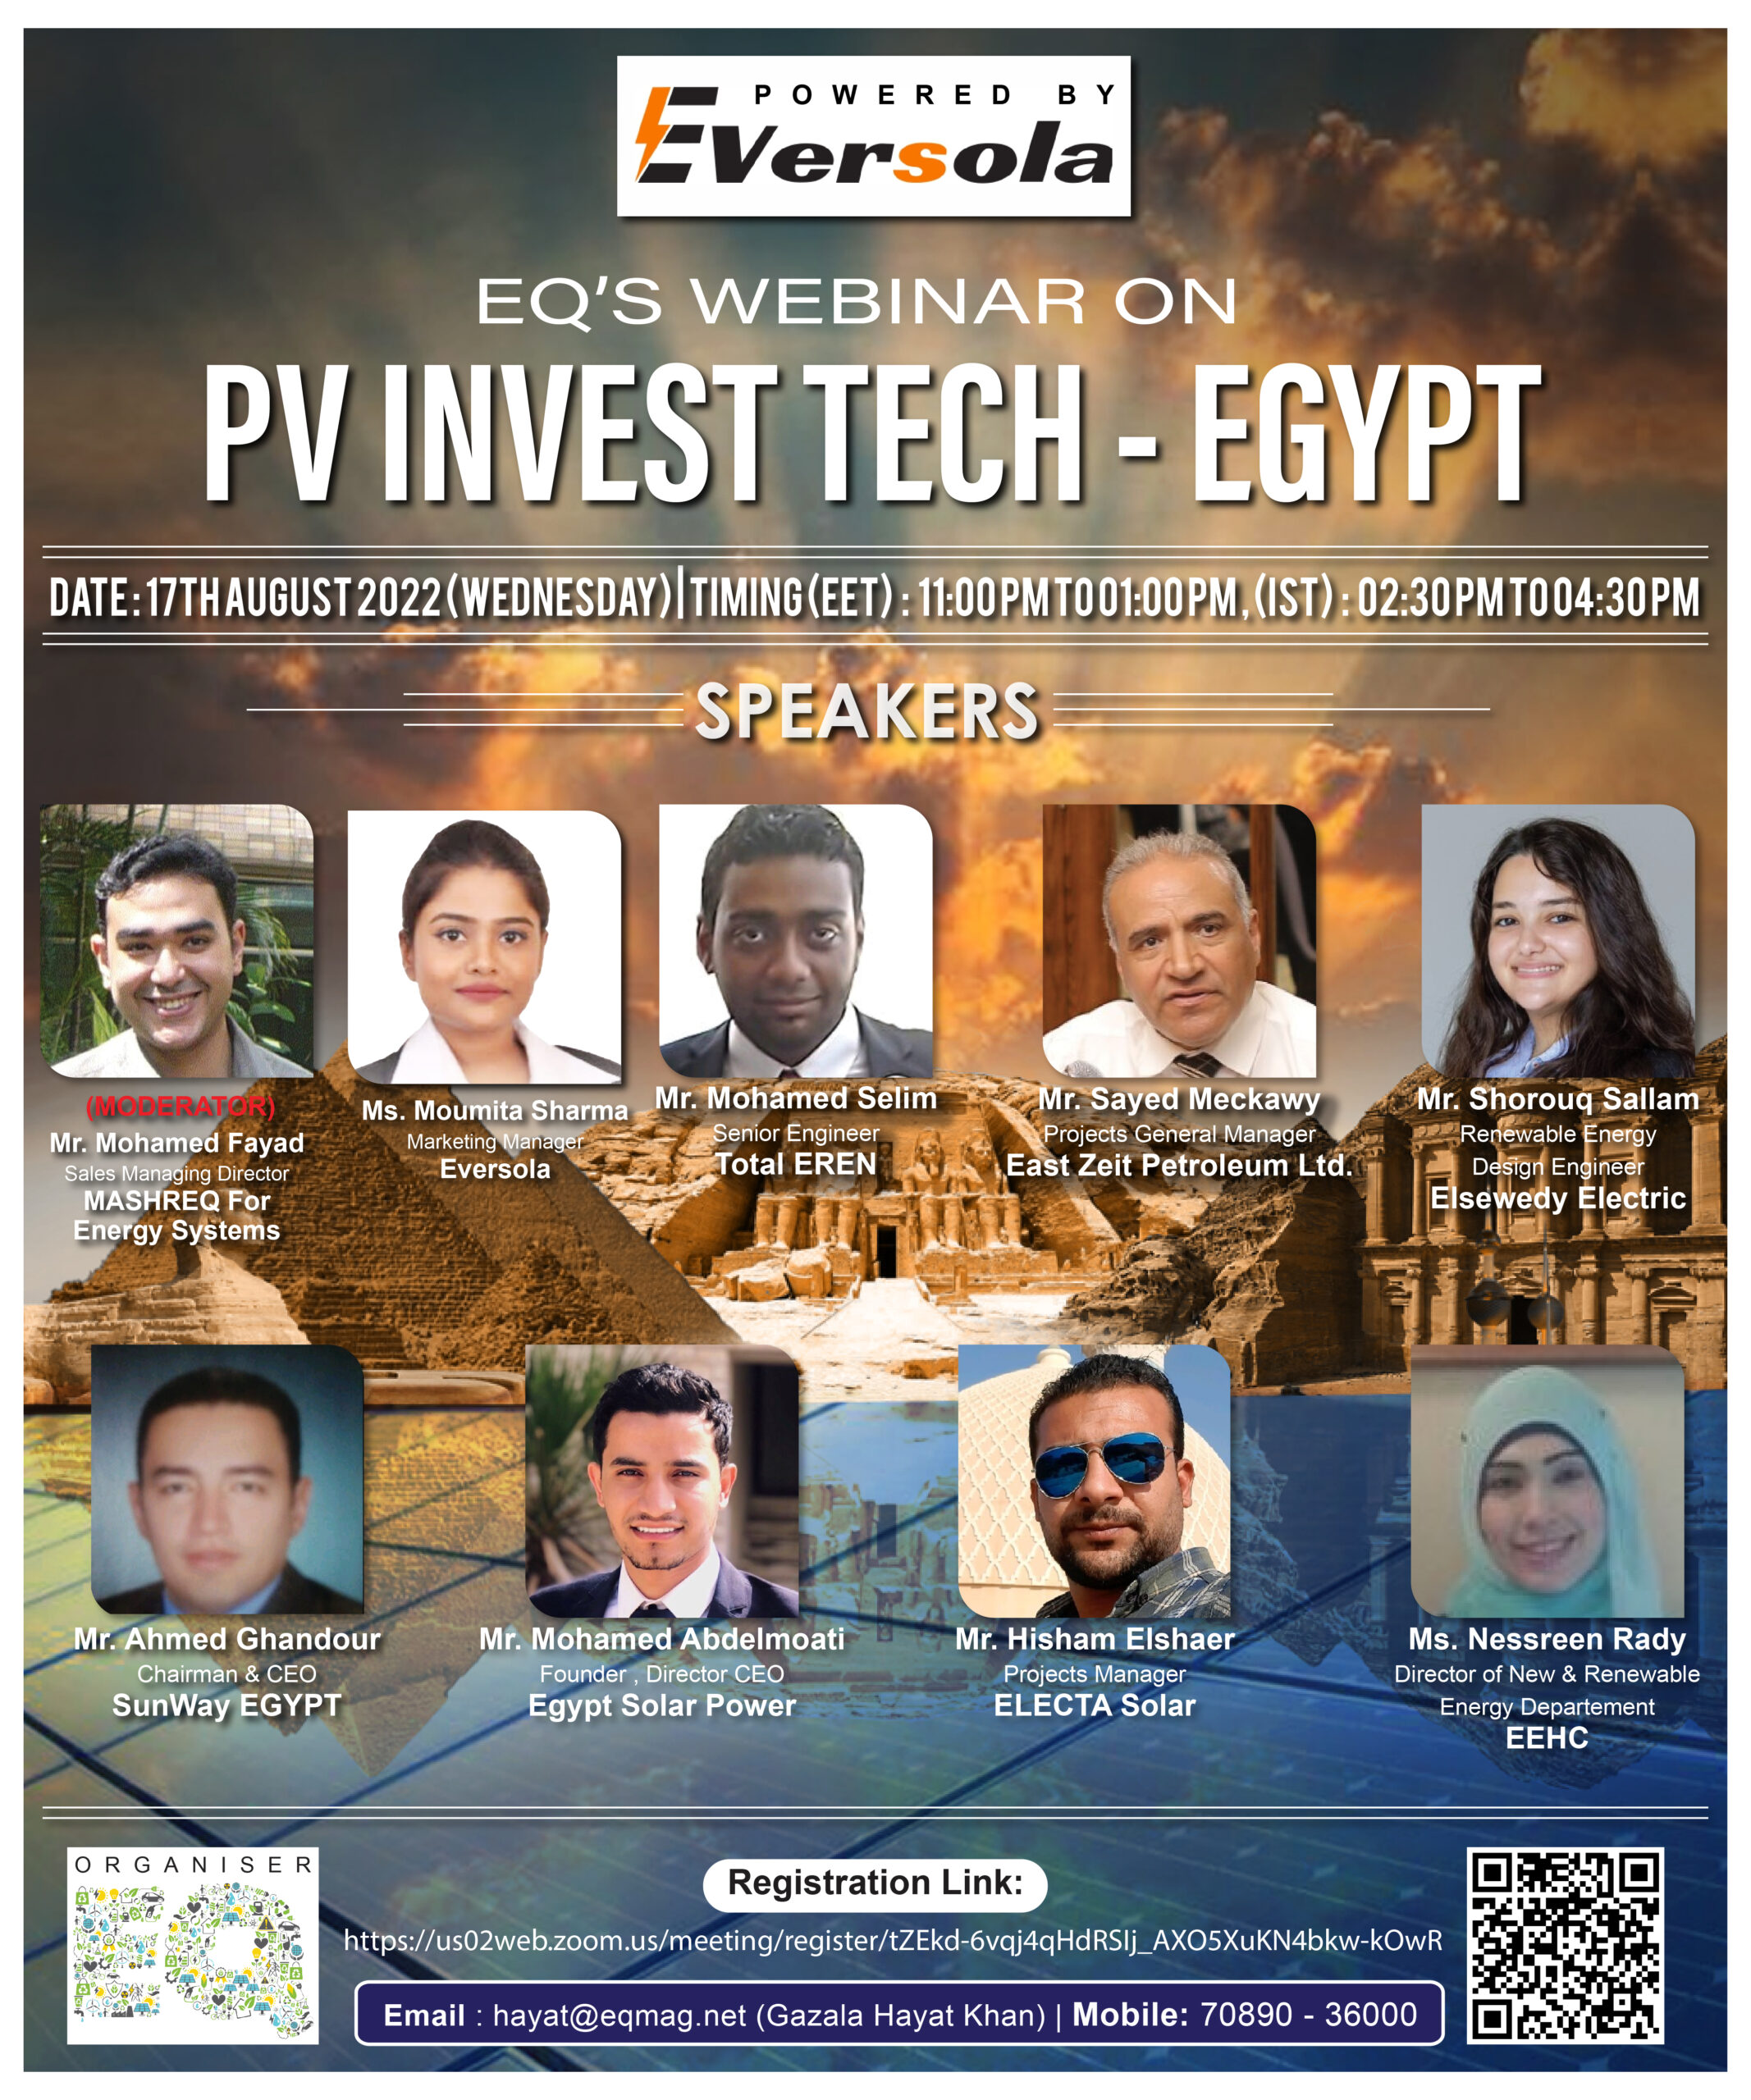 EQ Webinar on Egypt PV InvesTech 17th August 2022 (Wednesday) 2:30 PM Onwards….Register Now!